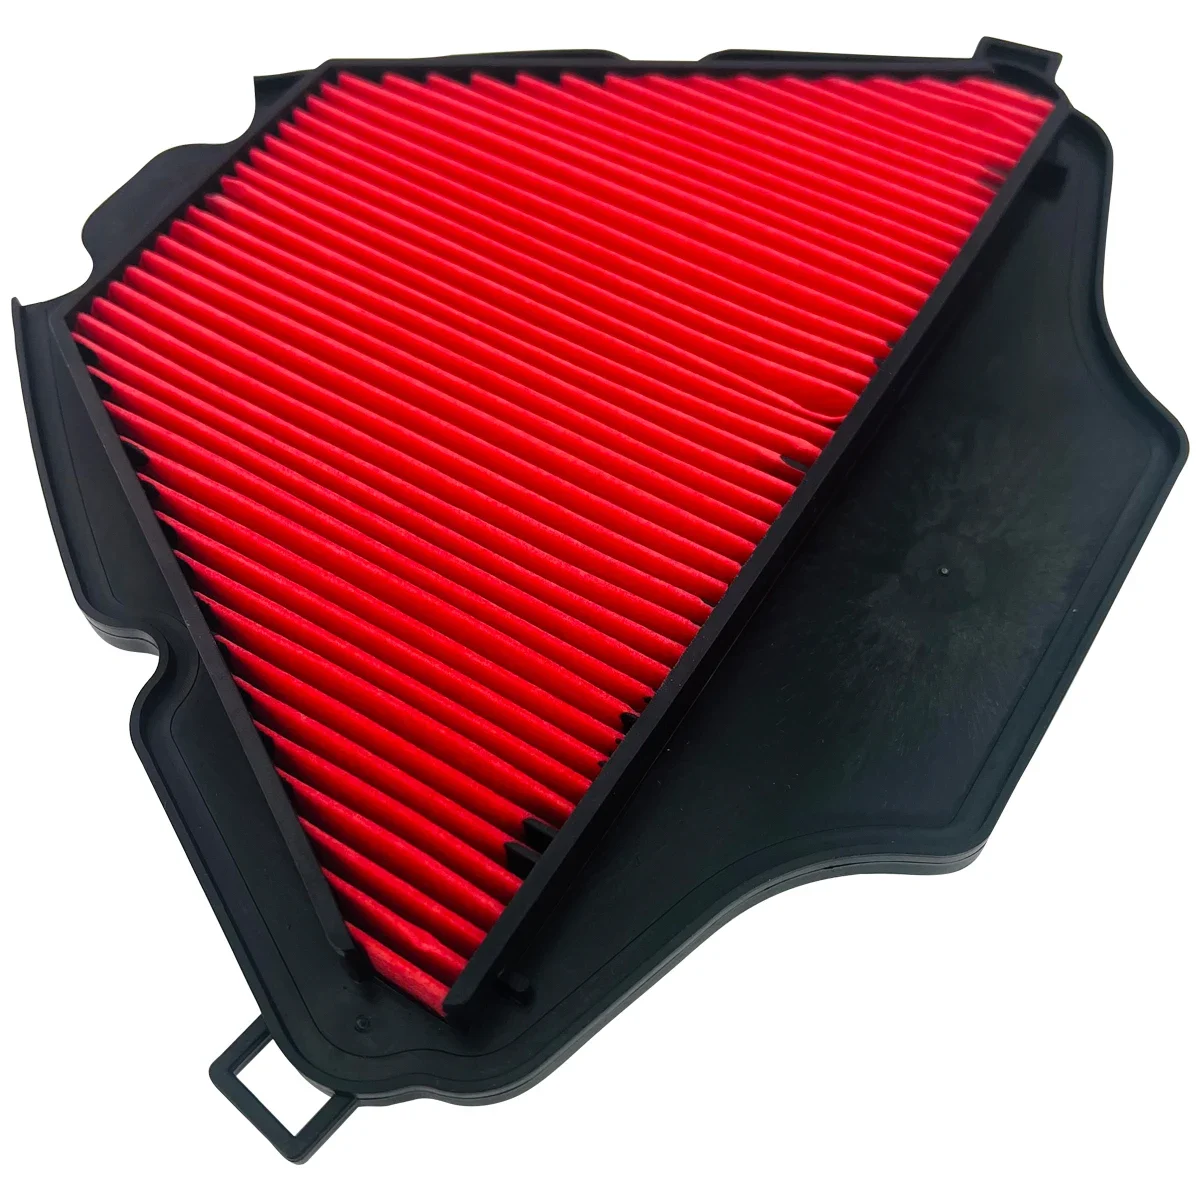 Lopor Motorcycle Air Filter For Honda NC750 XA XD 21-23 Scooter NSS750 M P Forza X-ADV750 ADV750 2021-2023 17210-MKT-D00 HFA1717